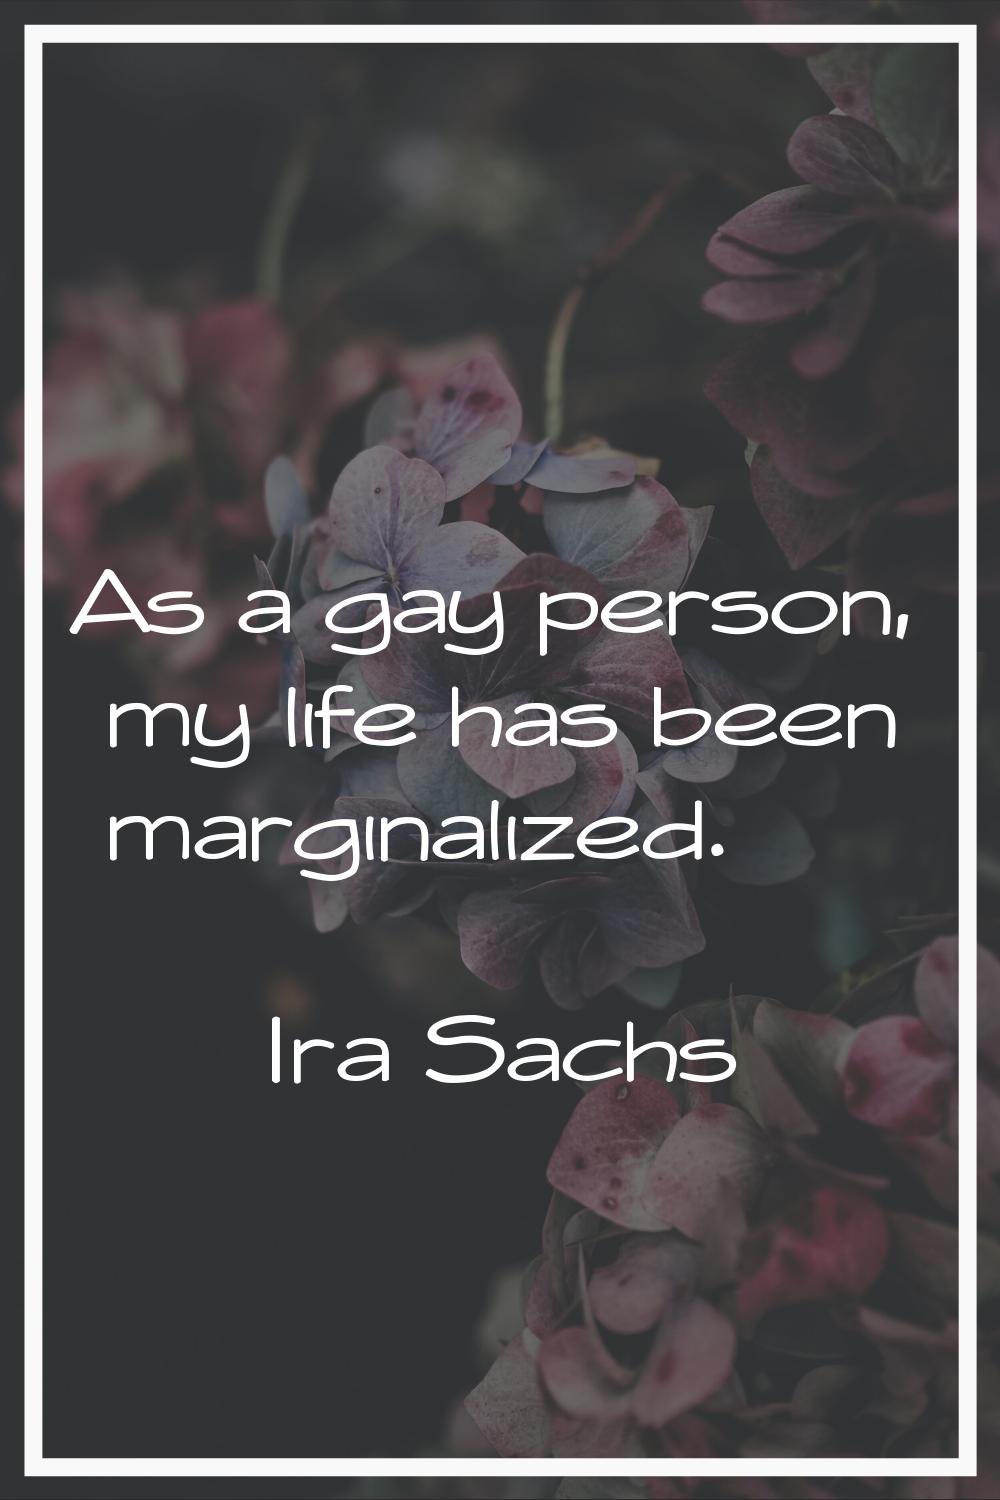 As a gay person, my life has been marginalized.